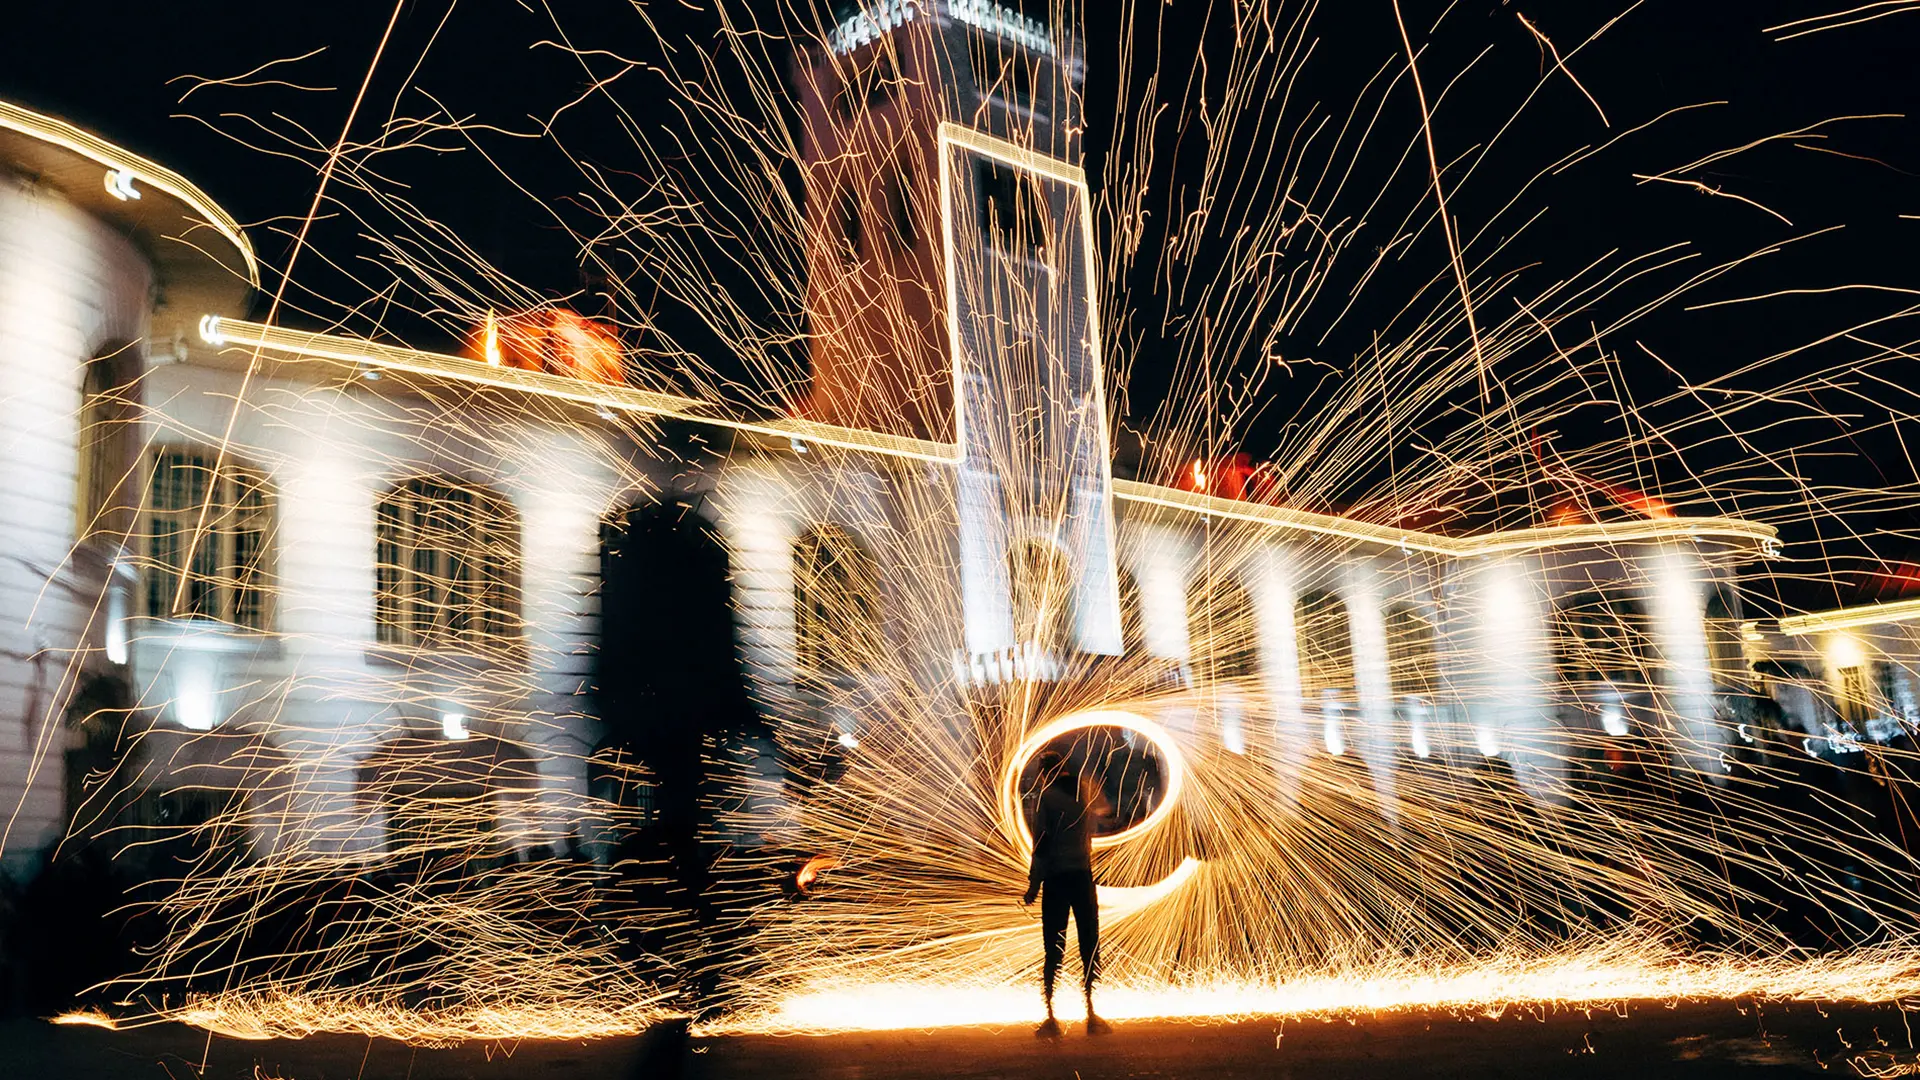 A young Iranian boy is spinning fireworks as part of Chaharshanbe Suri, Nowruz